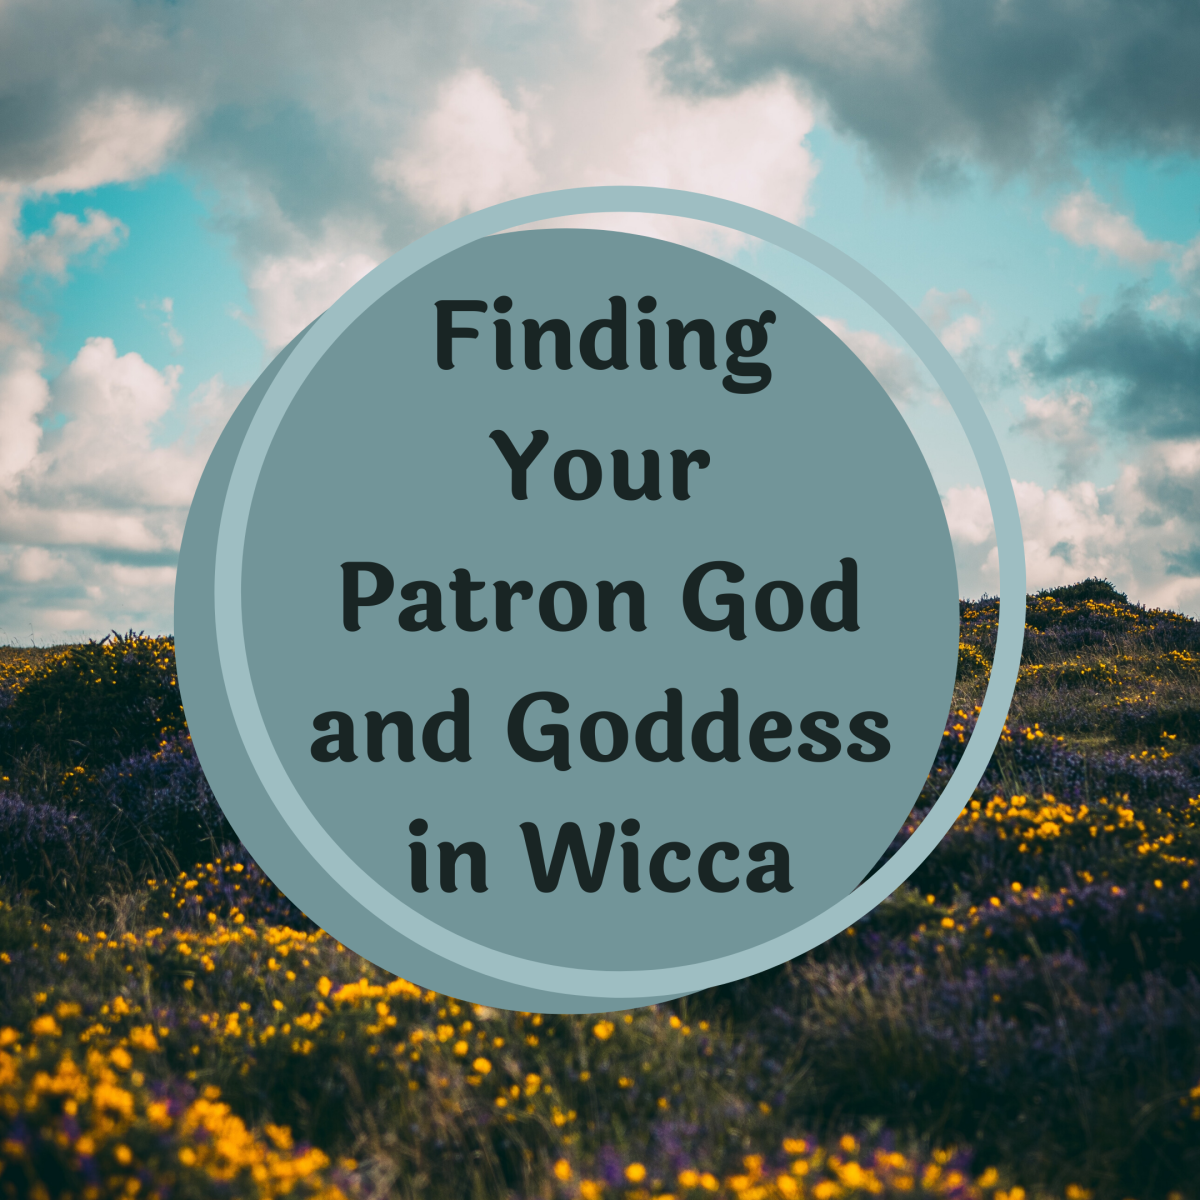 Discover how to find and foster a relationship with your Goddess and God in Wicca.